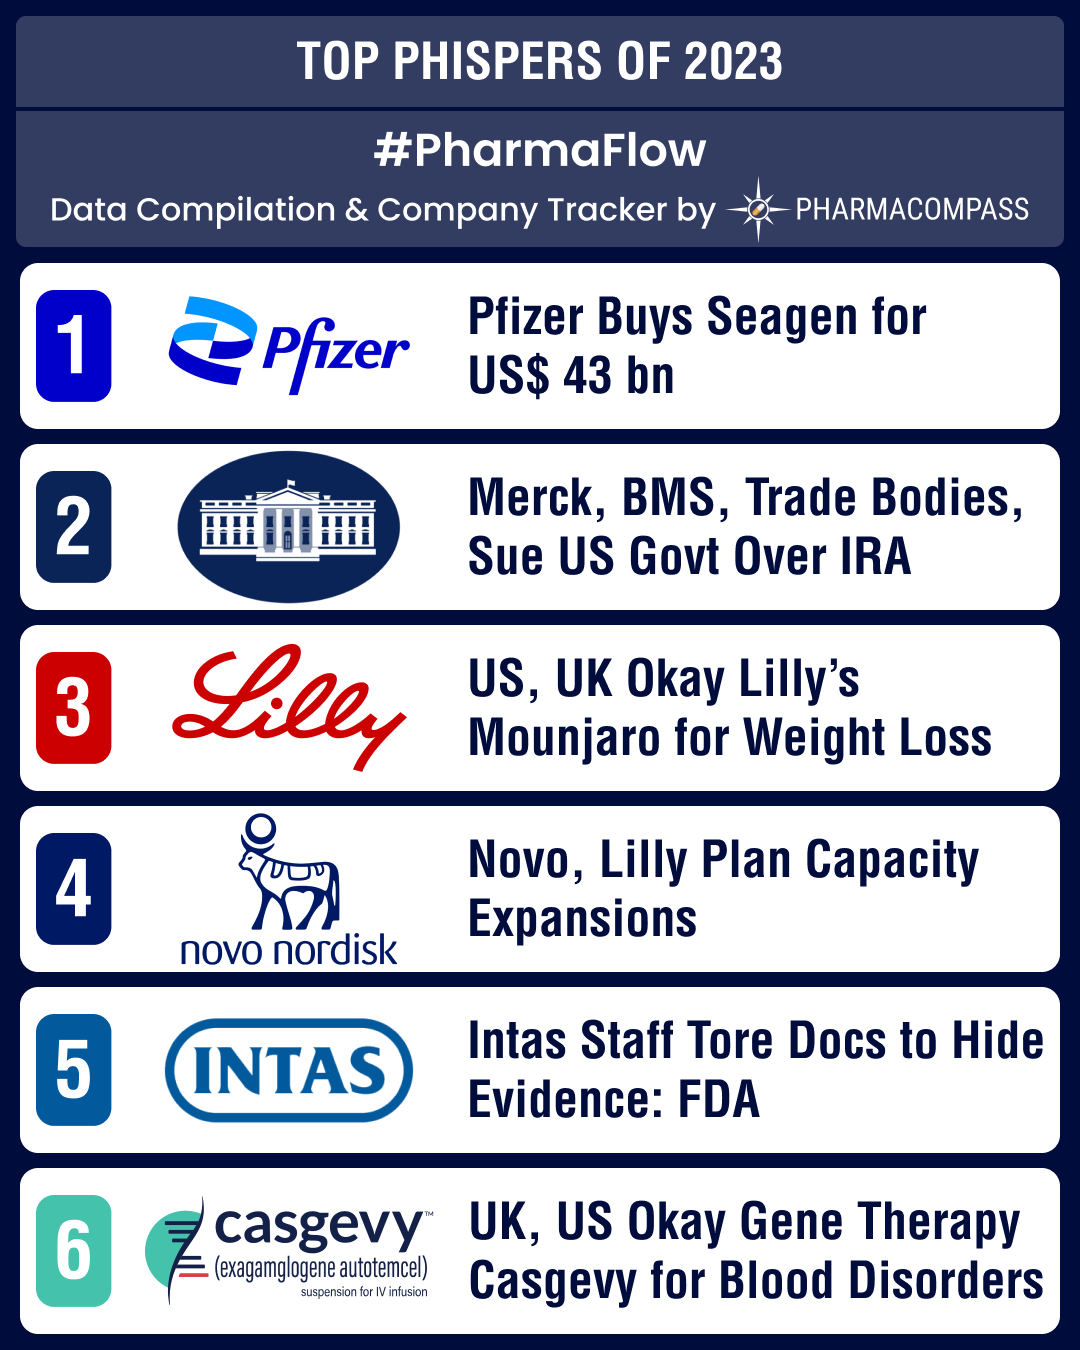 Pfizer’s buyout of Seagen, drugmakers suing US govt, obesity drugs make it to top 10 Phispers of 2023